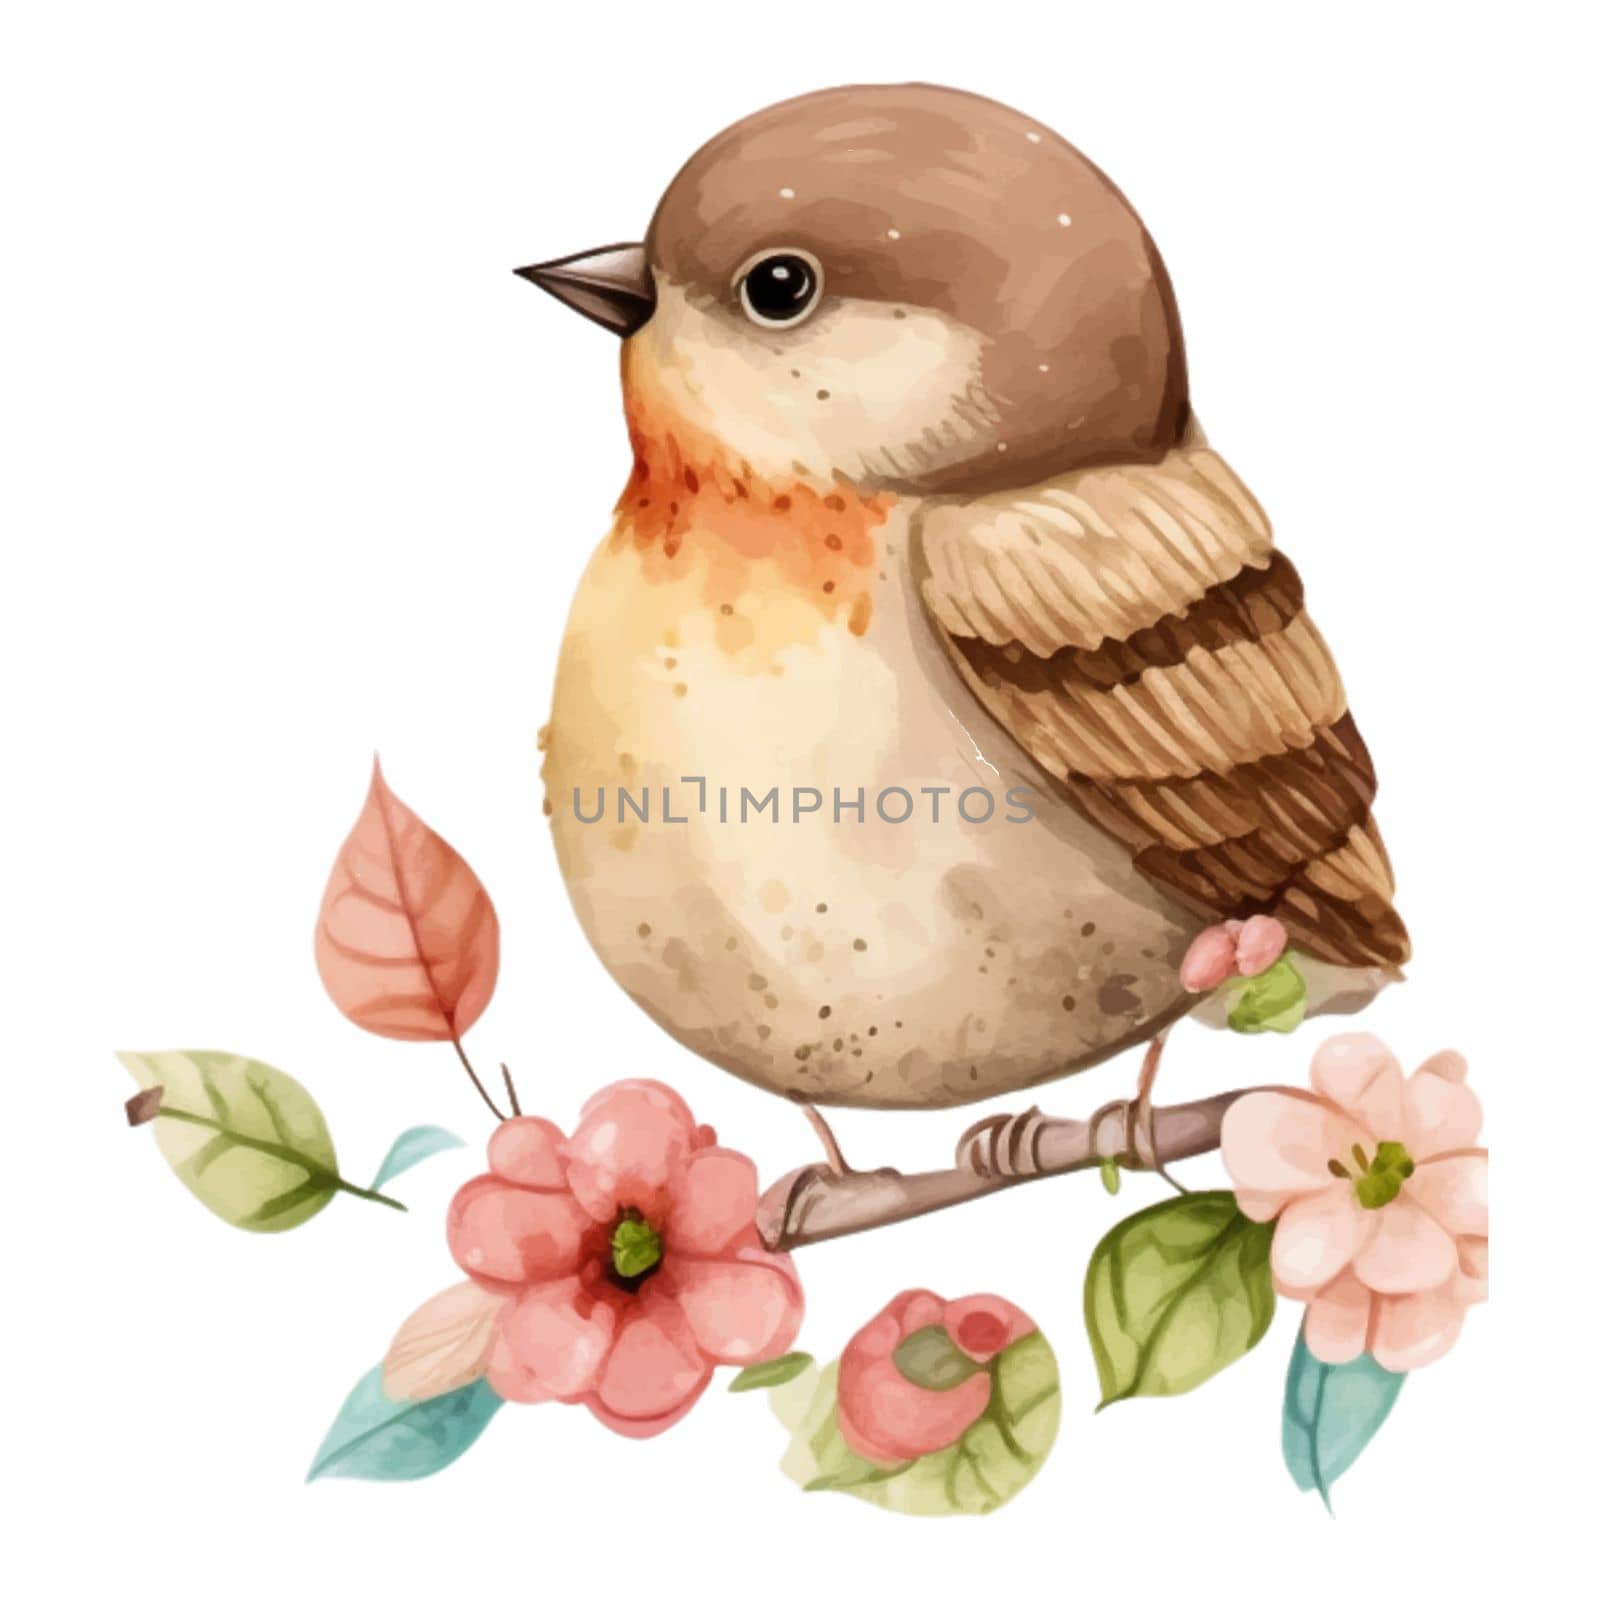 Spring Love Bird Watercolor Illustration. Tree branch with blossom flowers